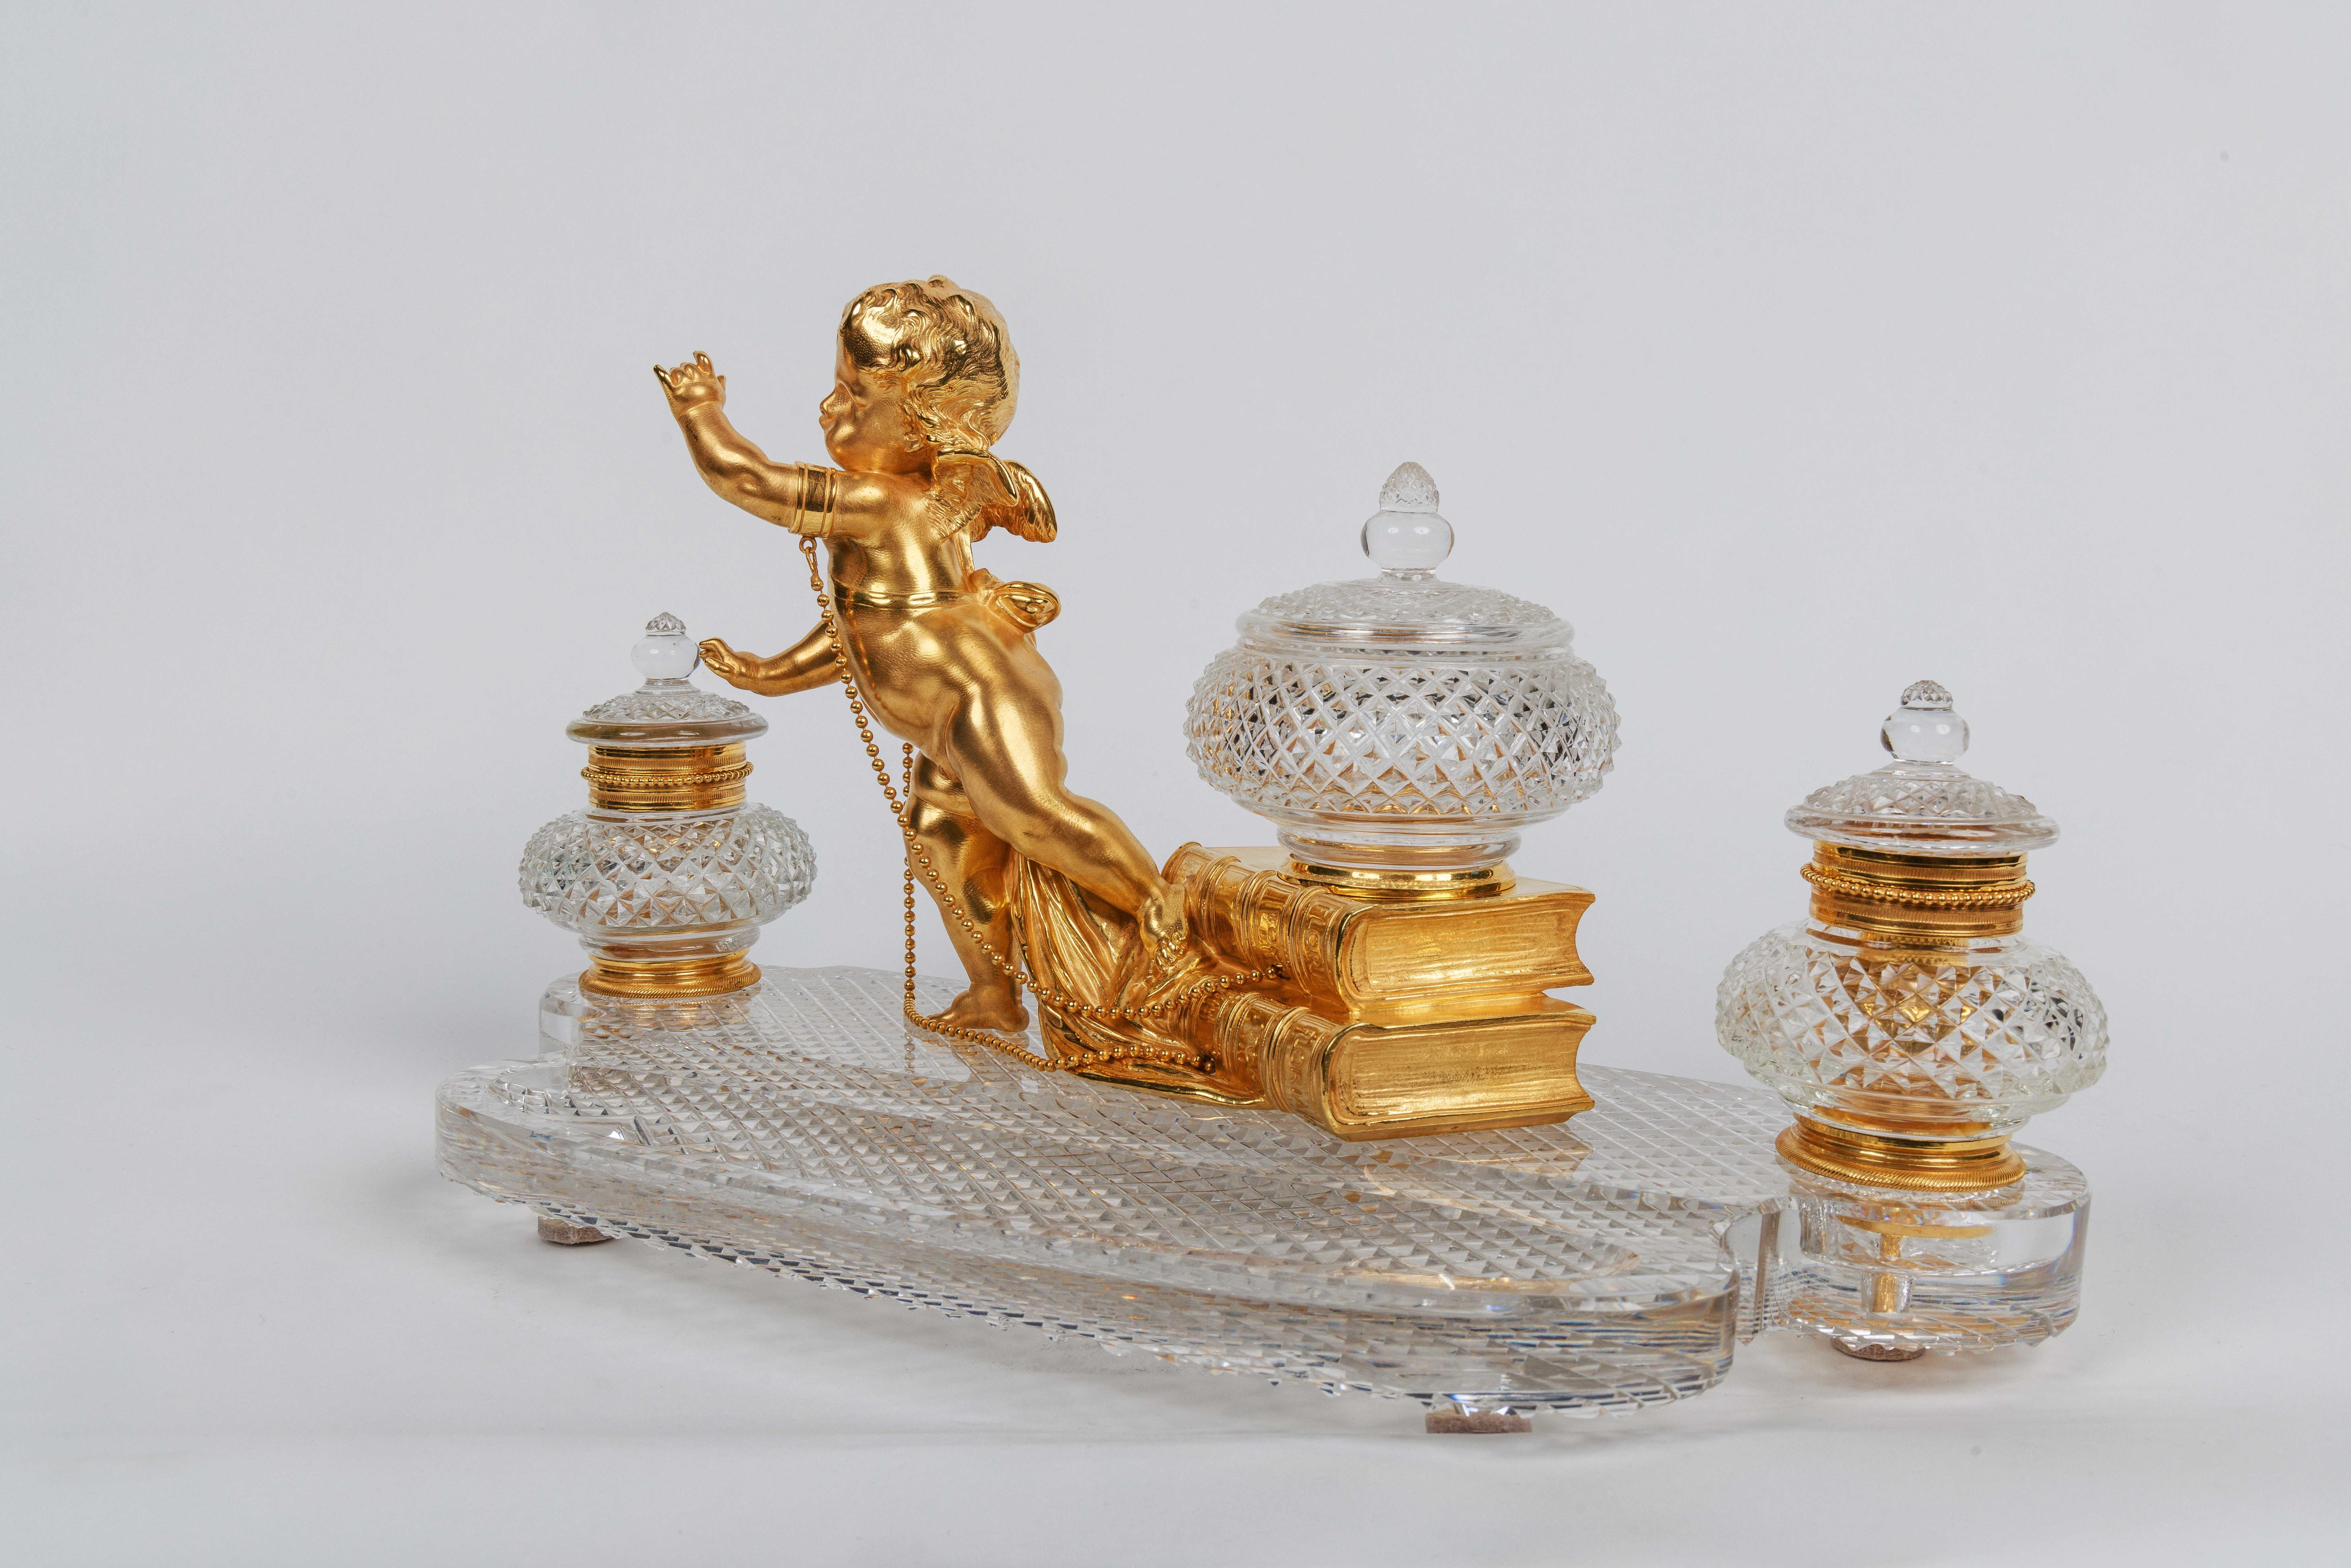 19th Century Rare French Ormolu and Diamond-Cut Crystal Figural Inkwell Encrier by Baccarat For Sale